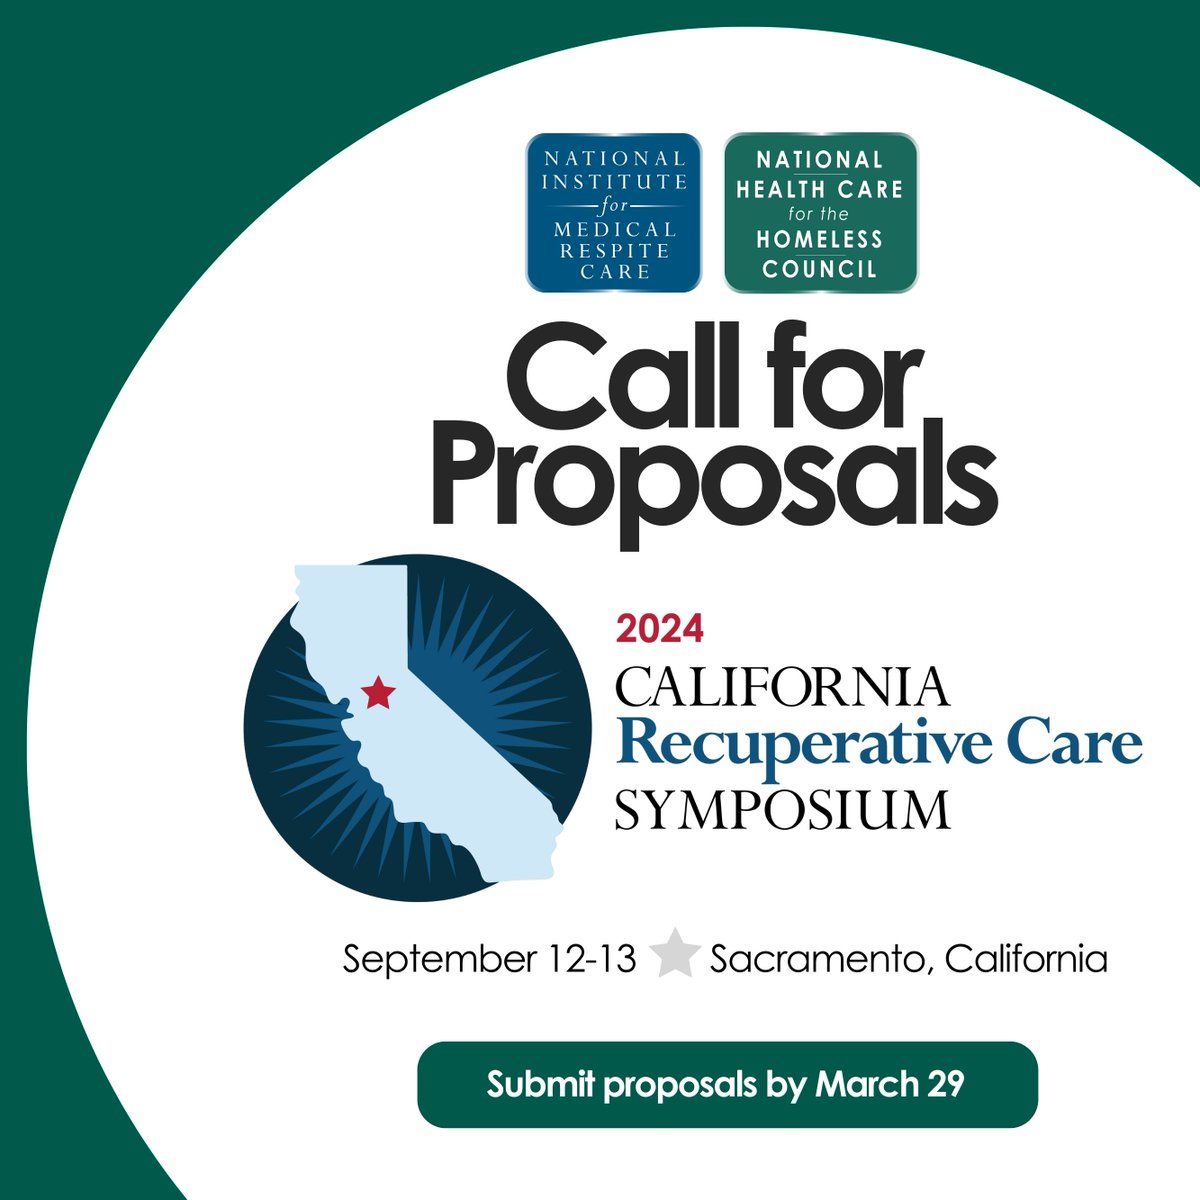 The National Institute for Medical Respite Care, a special program of NHCHC, is seeking presentation proposals for the inaugural California #RecuperativeCare Symposium, slated for Sept. 12-13, 2024, in Sacramento, CA. Learn more: ow.ly/9VAf50QFcs4 #CRCS2024